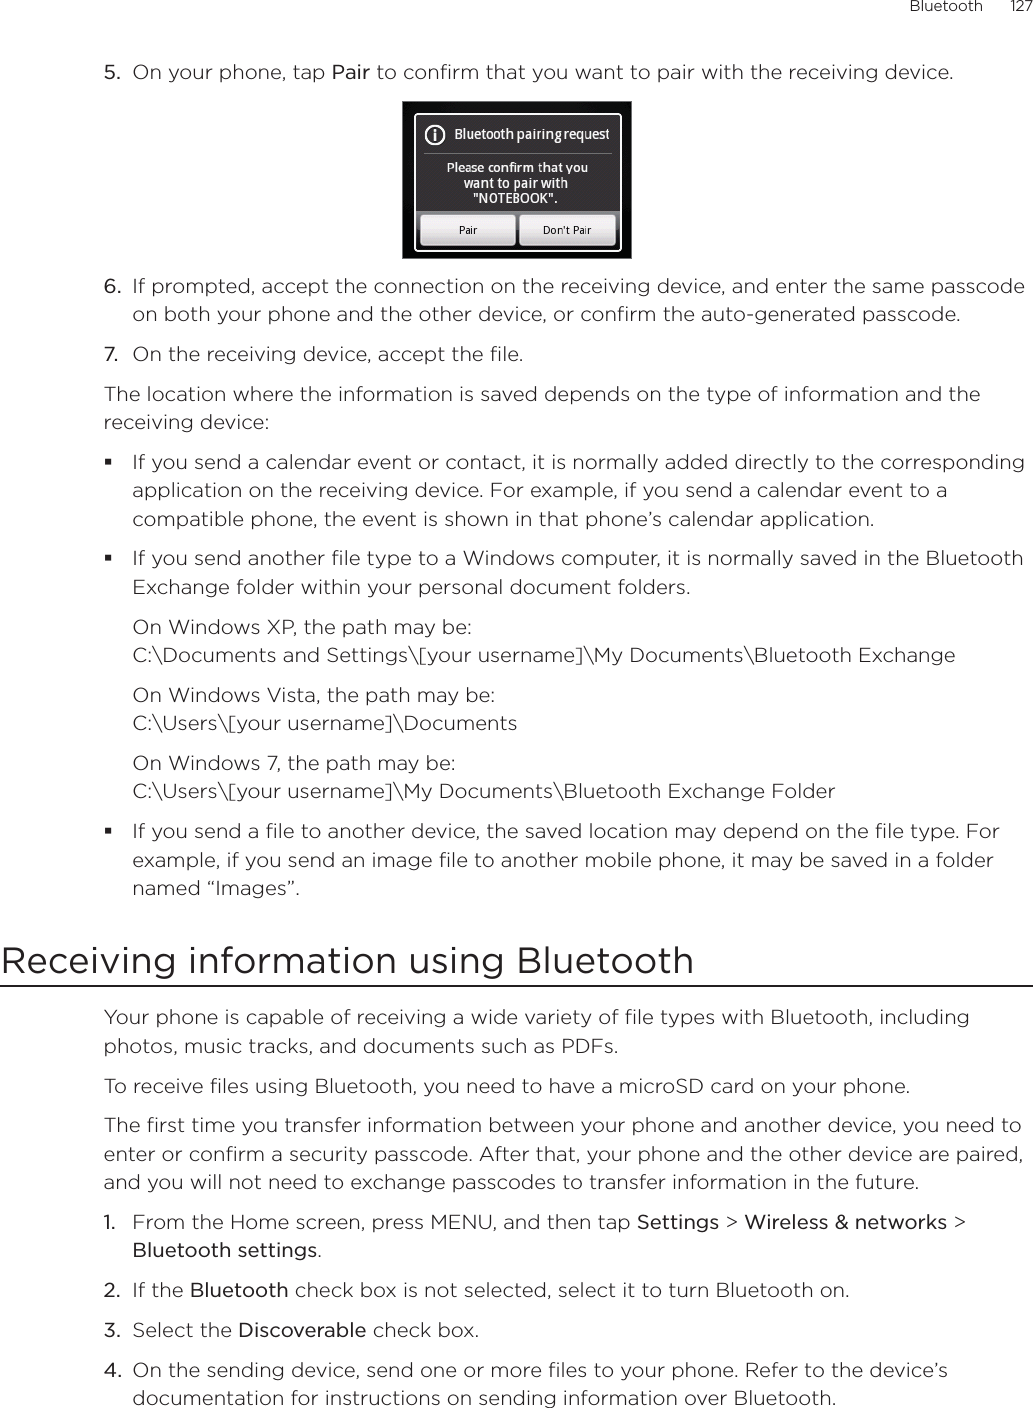 Bluetooth      1275.  On your phone, tap Pair to confirm that you want to pair with the receiving device.6.  If prompted, accept the connection on the receiving device, and enter the same passcode on both your phone and the other device, or confirm the auto-generated passcode. 7.  On the receiving device, accept the file.The location where the information is saved depends on the type of information and the receiving device:If you send a calendar event or contact, it is normally added directly to the corresponding application on the receiving device. For example, if you send a calendar event to a compatible phone, the event is shown in that phone’s calendar application. If you send another file type to a Windows computer, it is normally saved in the Bluetooth Exchange folder within your personal document folders.On Windows XP, the path may be:  C:\Documents and Settings\[your username]\My Documents\Bluetooth ExchangeOn Windows Vista, the path may be:  C:\Users\[your username]\DocumentsOn Windows 7, the path may be:  C:\Users\[your username]\My Documents\Bluetooth Exchange FolderIf you send a file to another device, the saved location may depend on the file type. For example, if you send an image file to another mobile phone, it may be saved in a folder named “Images”. Receiving information using BluetoothYour phone is capable of receiving a wide variety of file types with Bluetooth, including photos, music tracks, and documents such as PDFs.To receive files using Bluetooth, you need to have a microSD card on your phone.The first time you transfer information between your phone and another device, you need to enter or confirm a security passcode. After that, your phone and the other device are paired, and you will not need to exchange passcodes to transfer information in the future. From the Home screen, press MENU, and then tap Settings &gt; Wireless &amp; networks &gt; Bluetooth settings. If the Bluetooth check box is not selected, select it to turn Bluetooth on. Select the Discoverable check box. On the sending device, send one or more files to your phone. Refer to the device’s documentation for instructions on sending information over Bluetooth. 1.2.3.4.